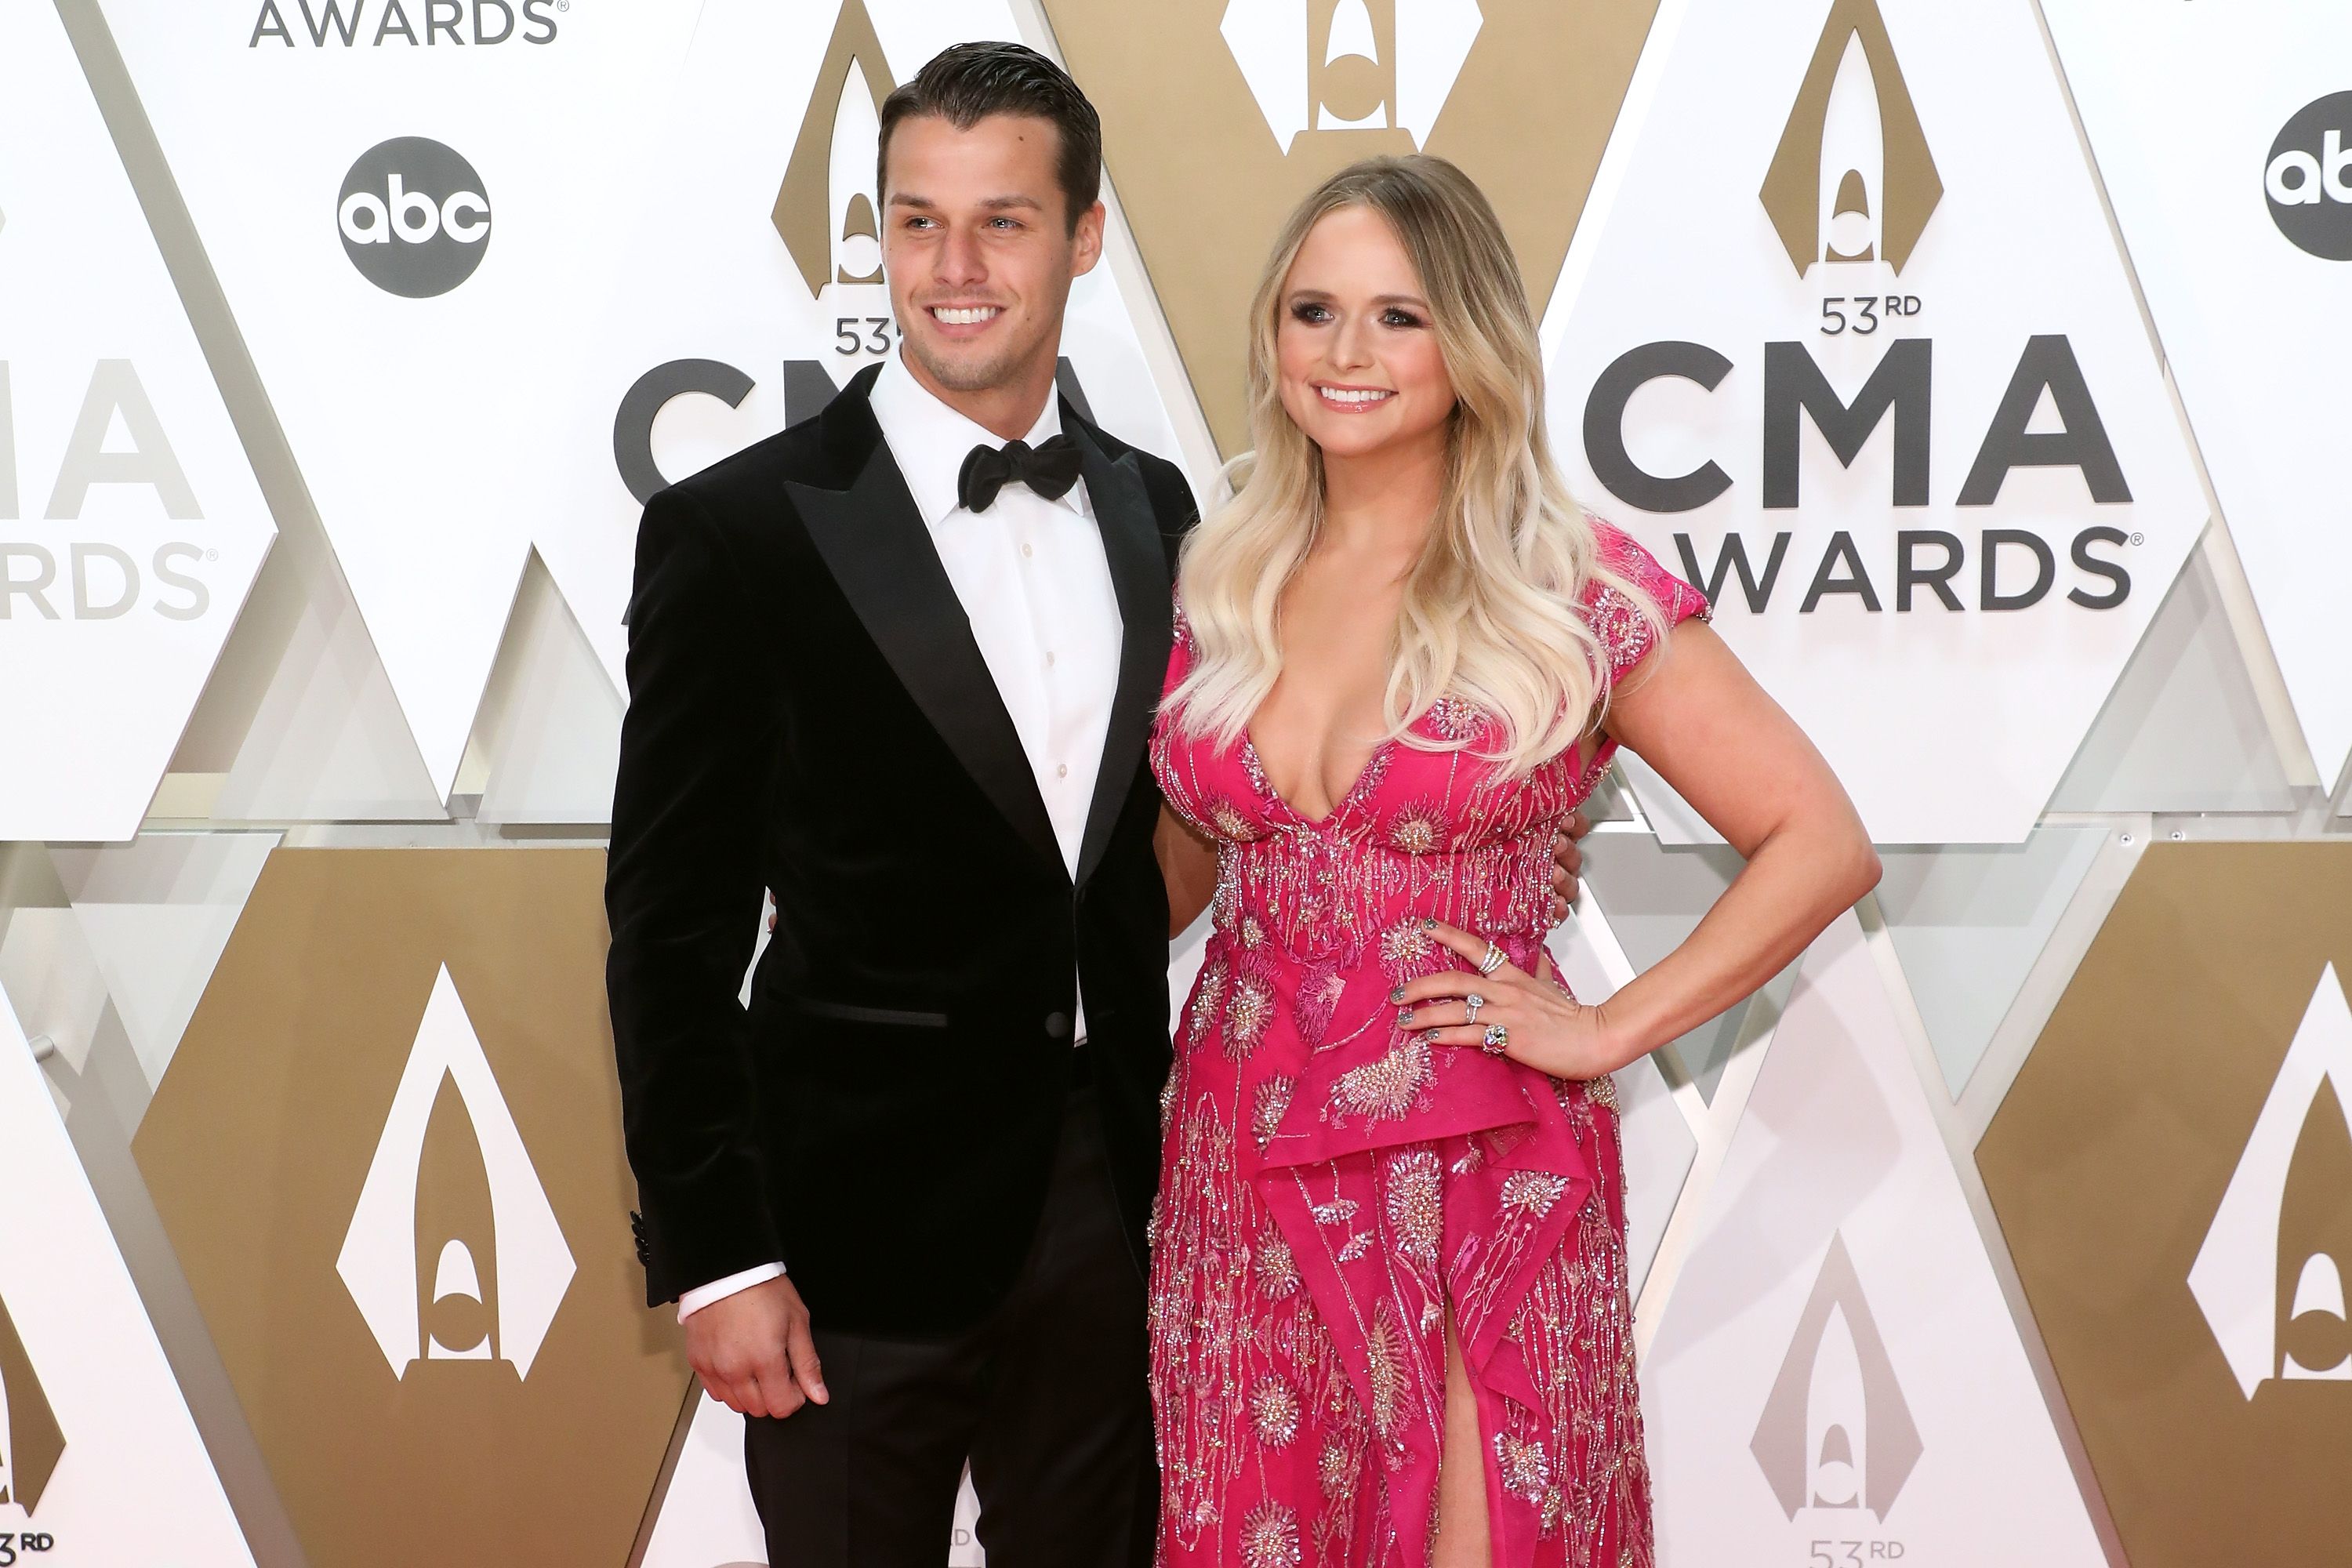 Brendan McLoughlin and Miranda Lambert at the 53rd annual CMA Awards in 2019, in Nashville, Tennessee | Source: Getty Images